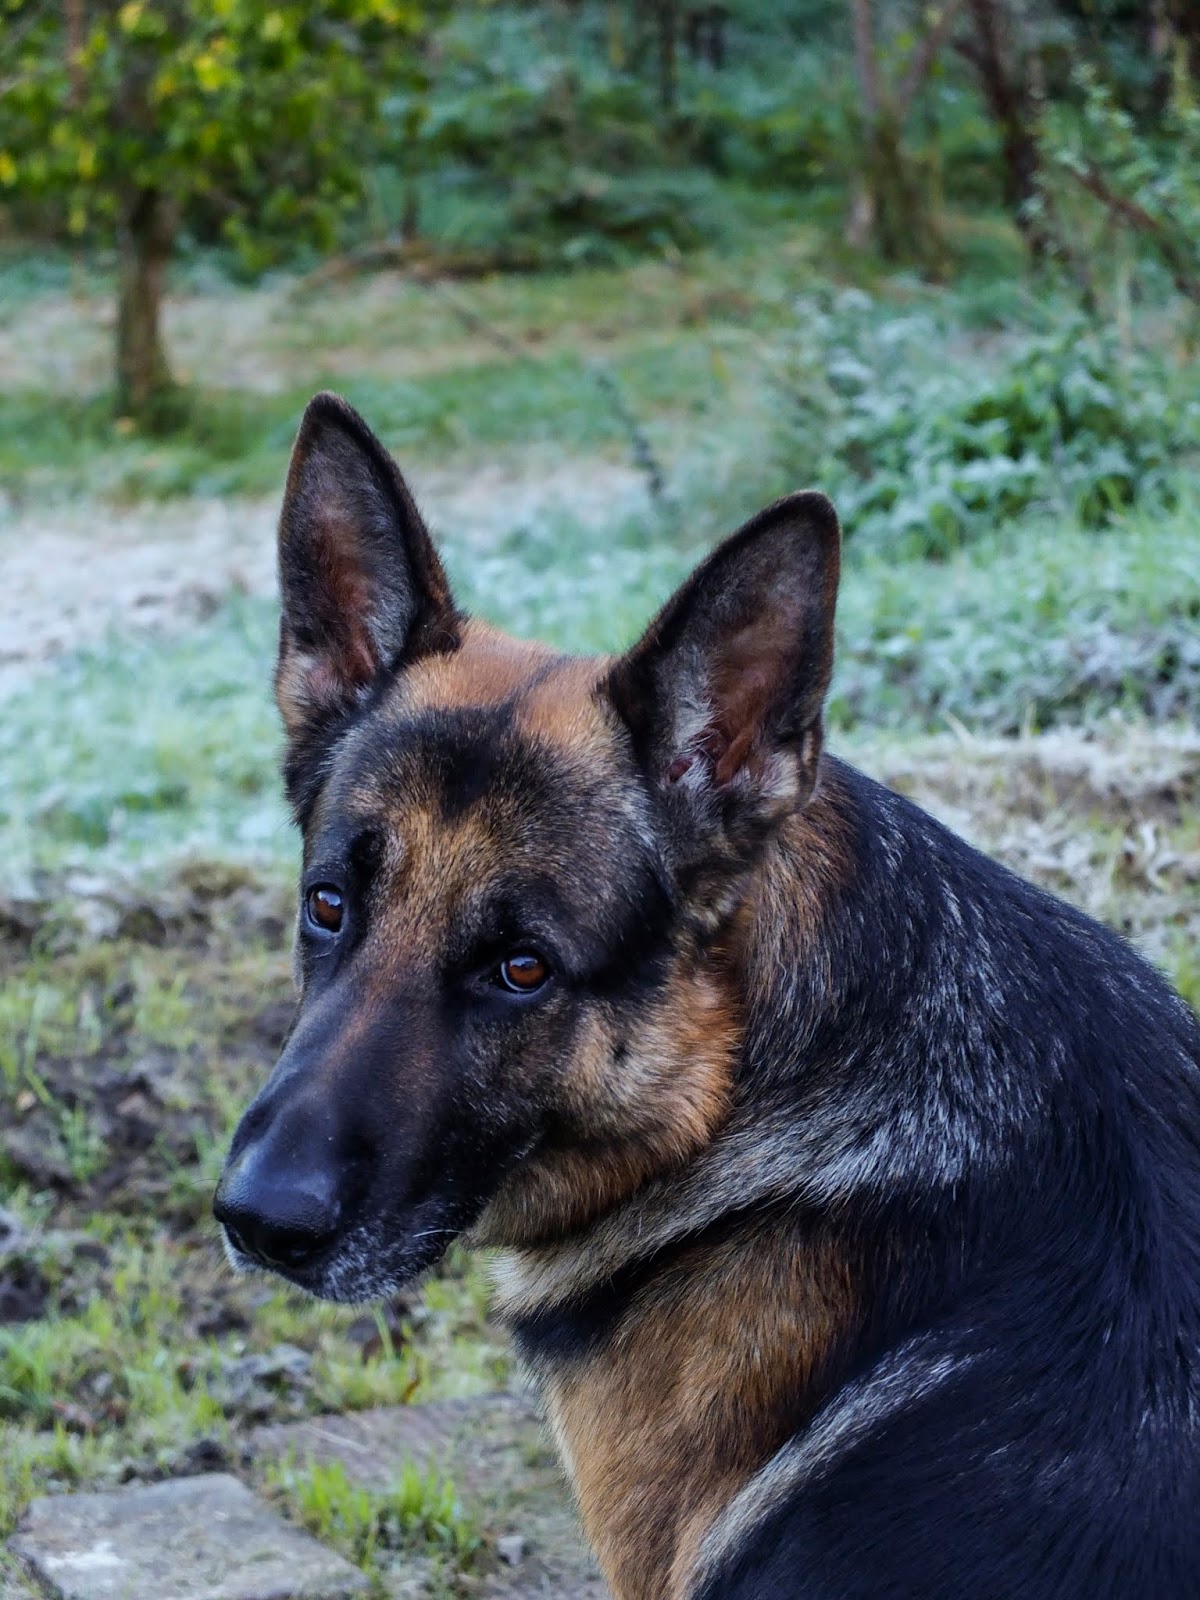 A young German Shepherd Steve looking back at the camera in a frosty garden.